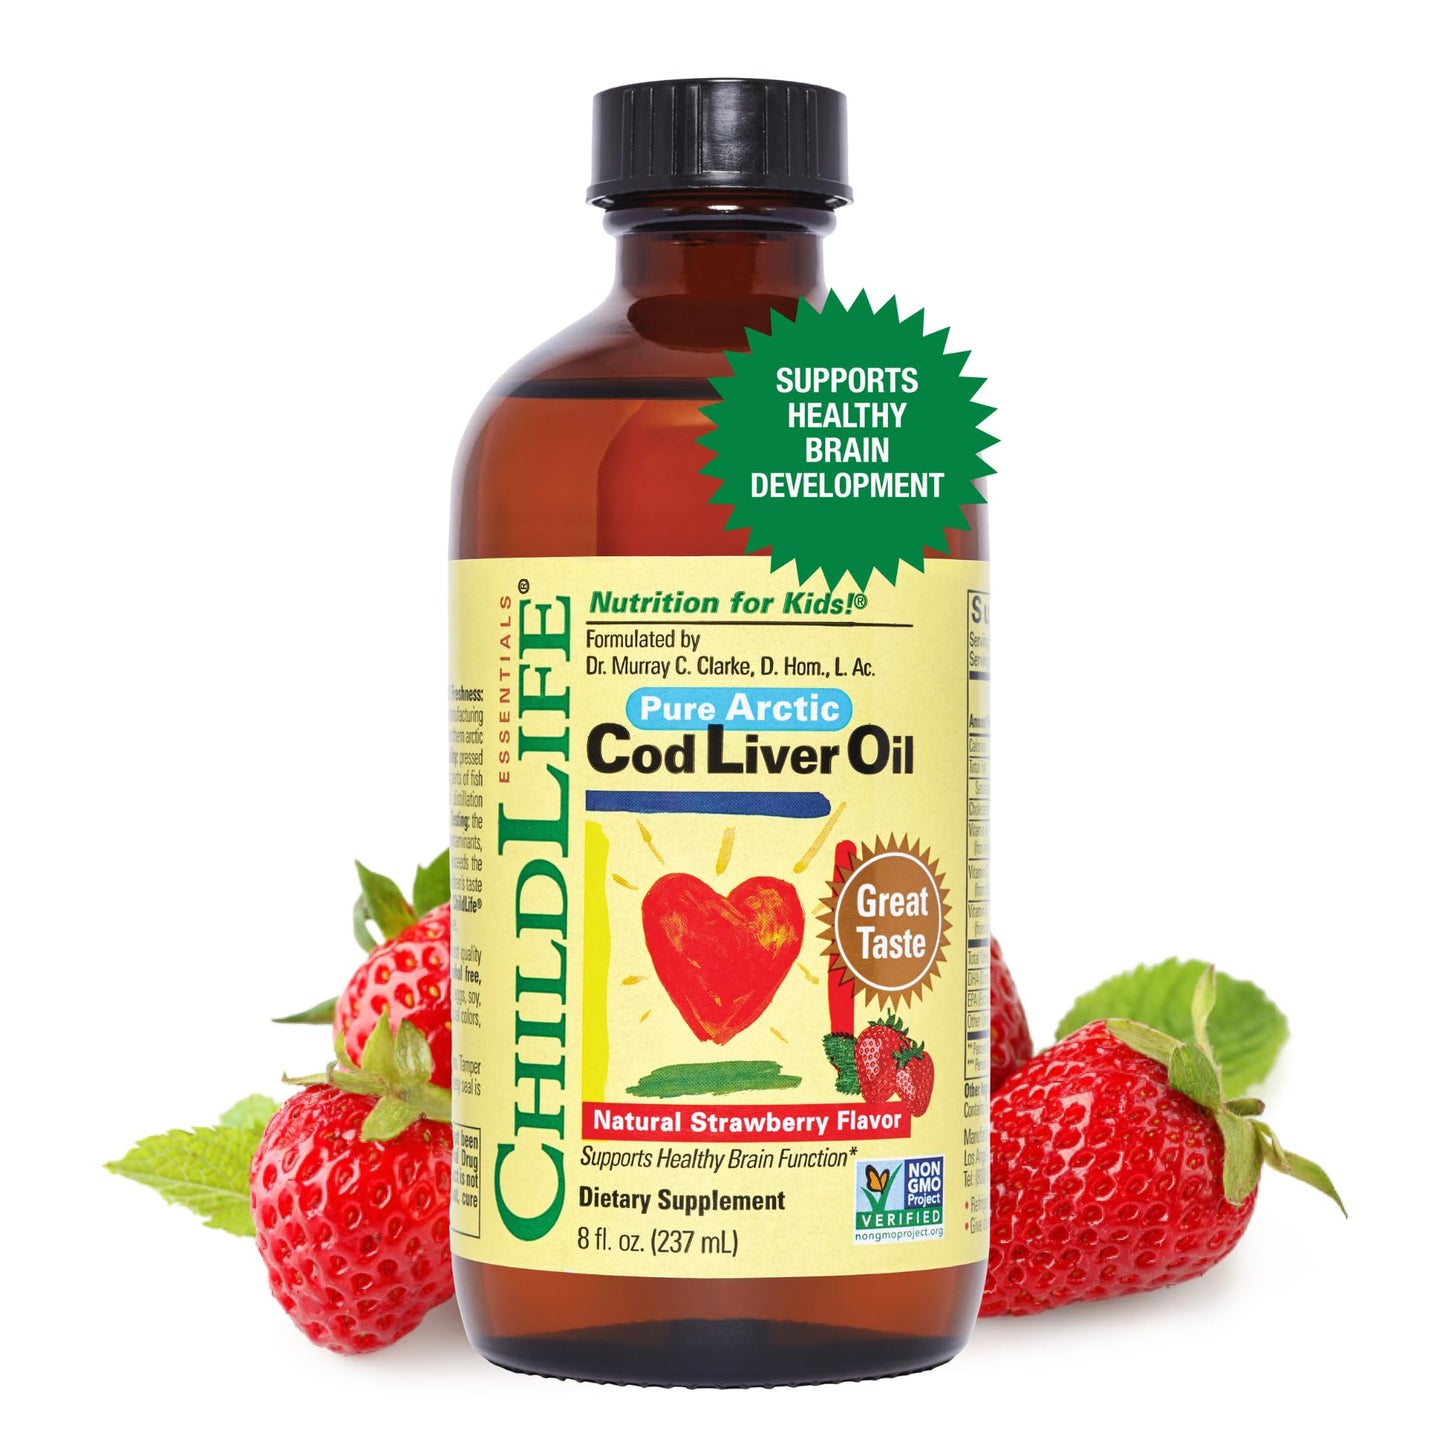 CHILDLIFE Essentials Liquid Cod Liver Oil for Kids - Purified Arctic Cod Liver Oil, Supports Healthy Brain Function, All-Natural, Non-GMO, Gluten-Free - Natural Strawberry Flavor, 8 Fl Oz Bottle